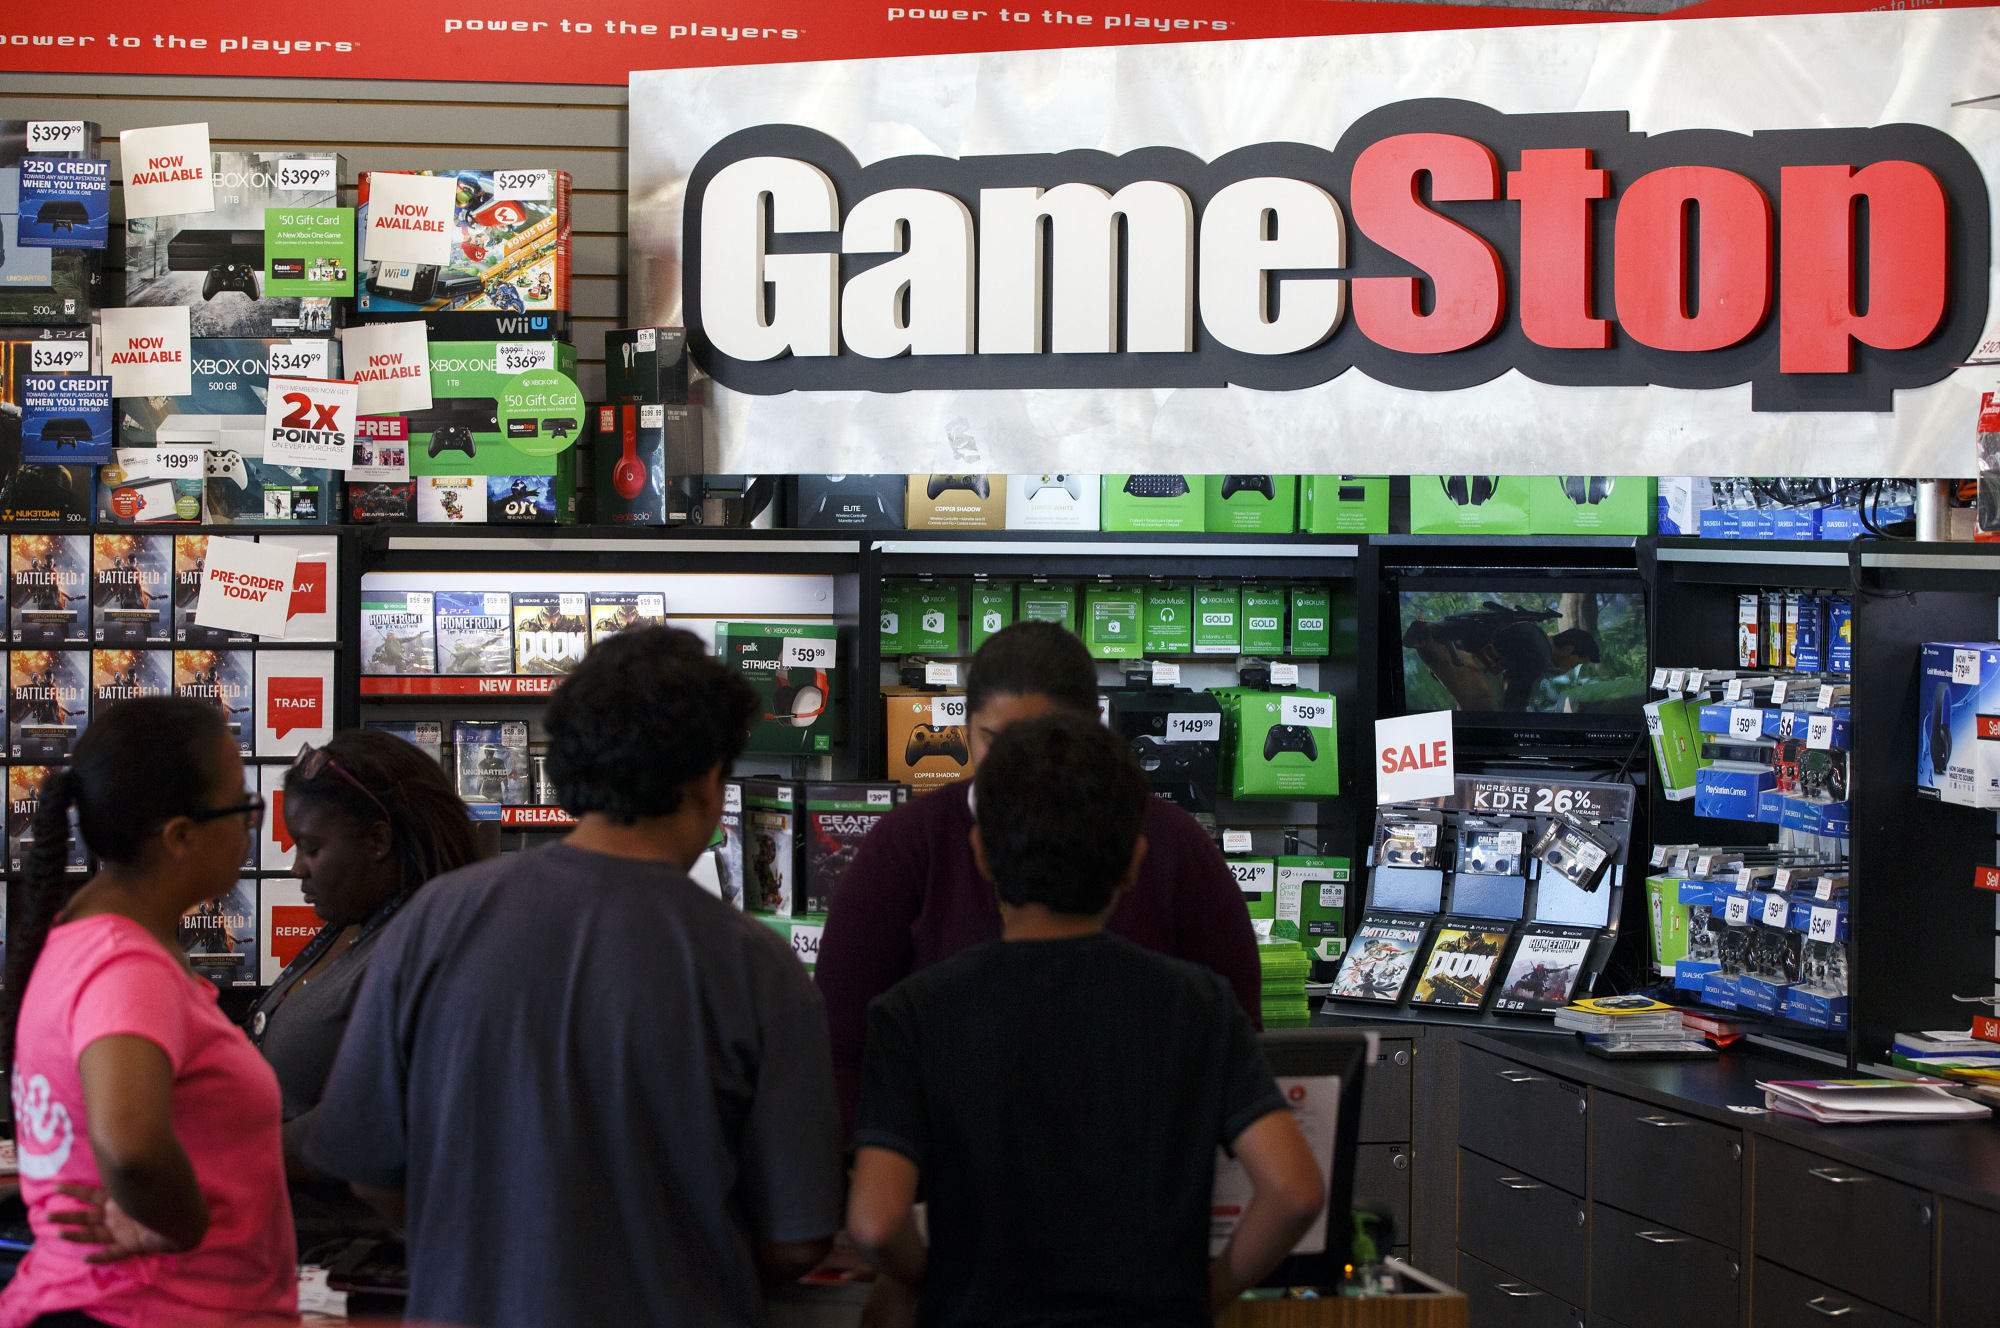 A GameStop store in West Hollywood.